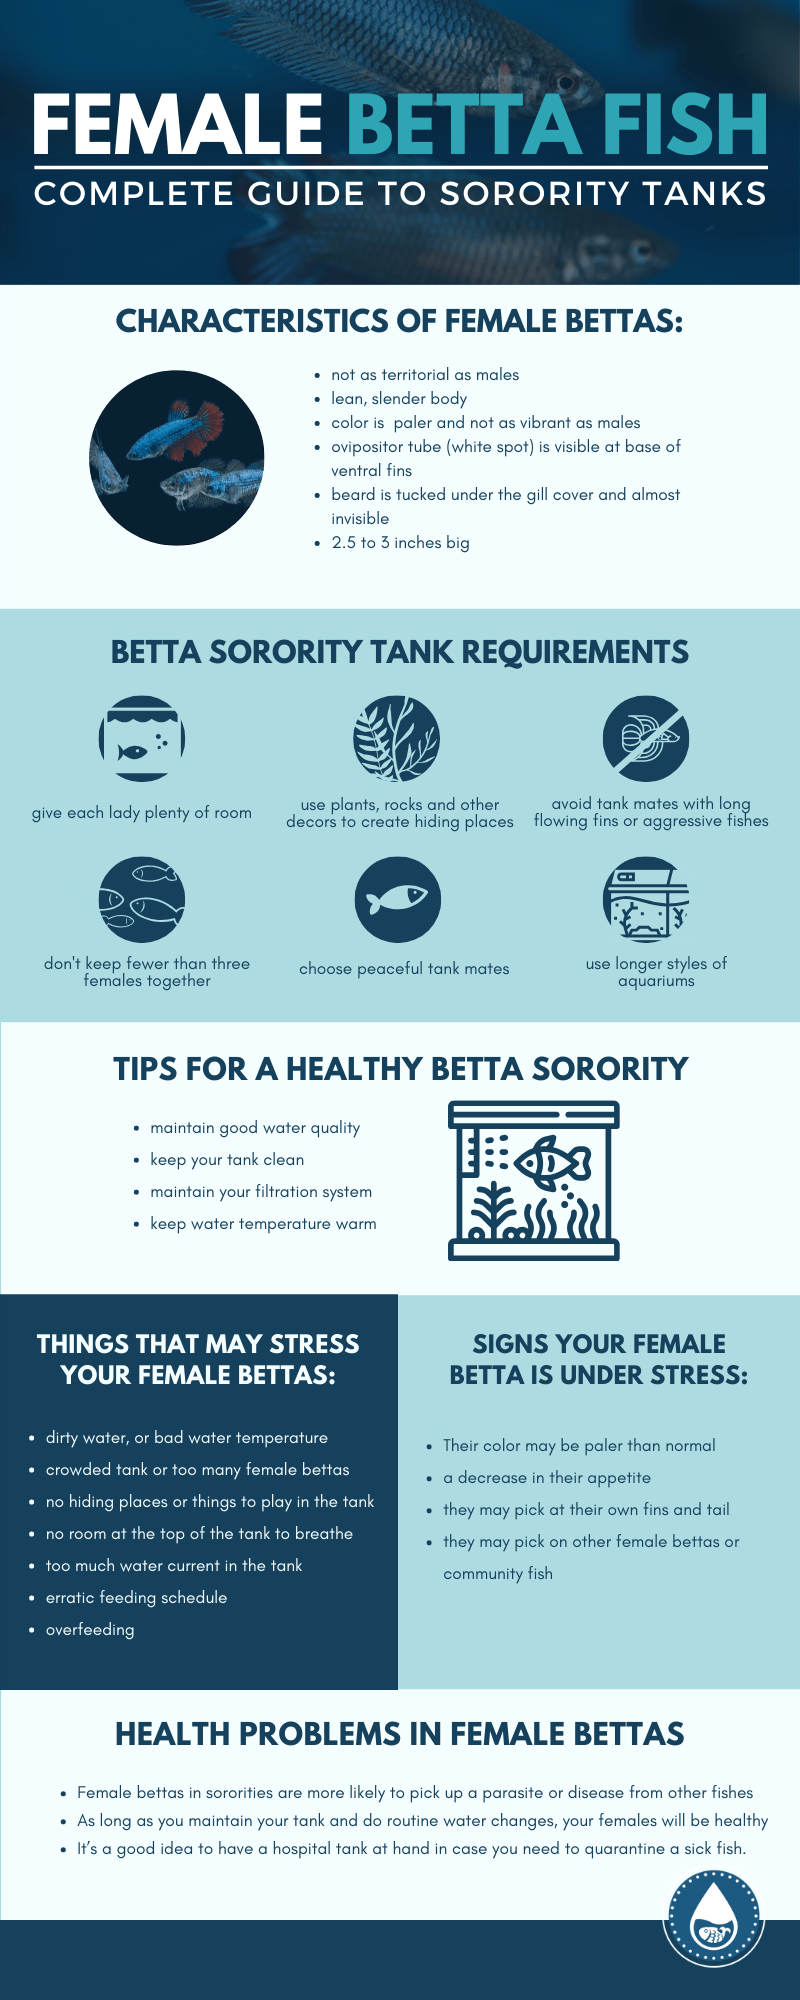 Female Betta Fish—Complete Guide to Sorority Tanks - Infographic